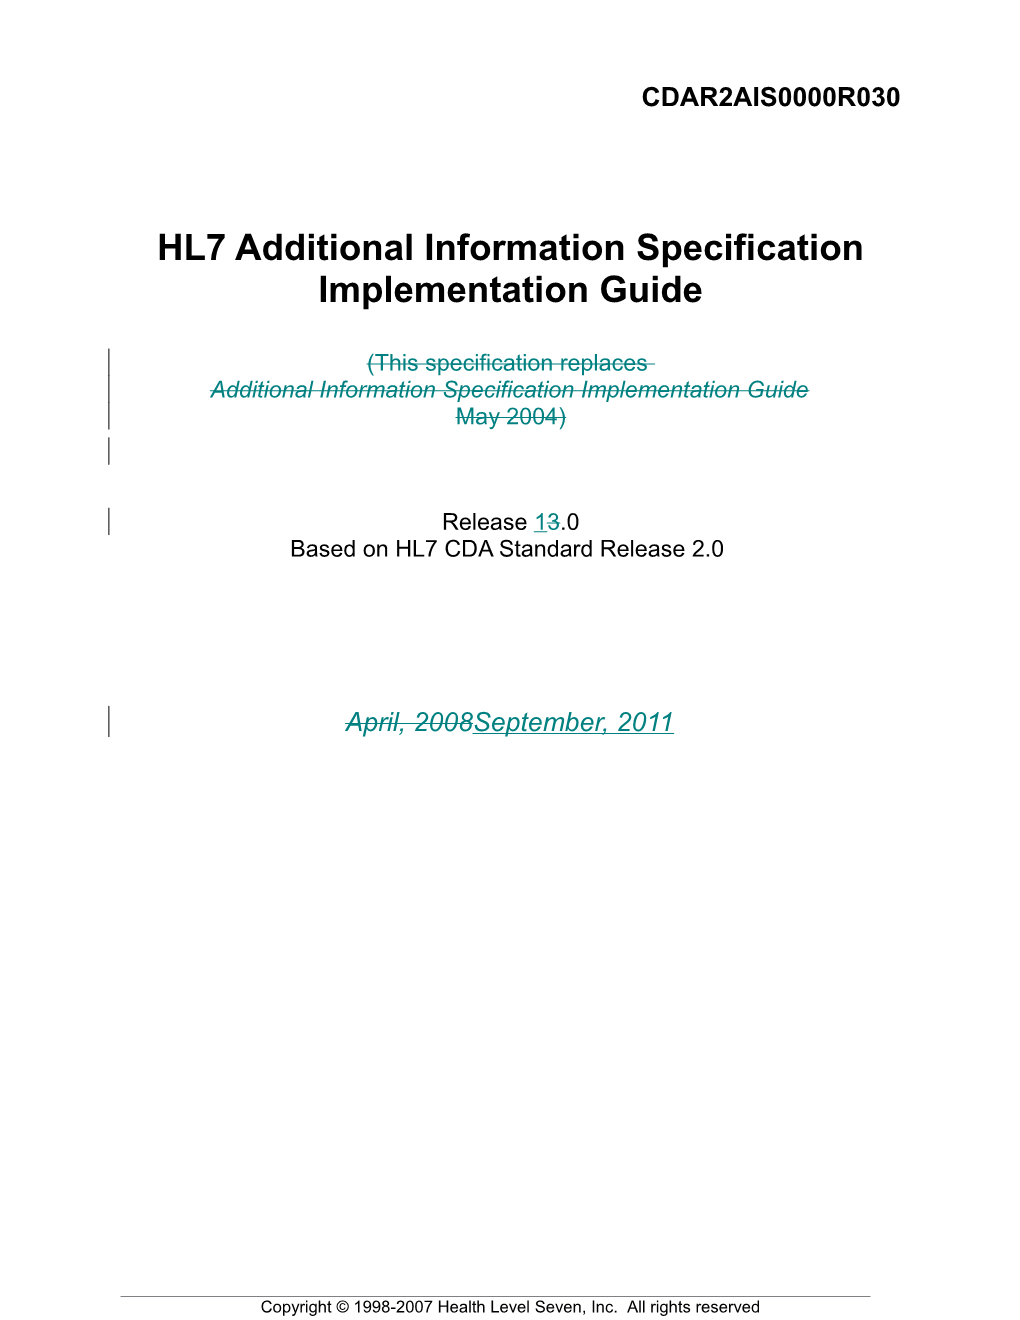 Additional Information Specification 0000